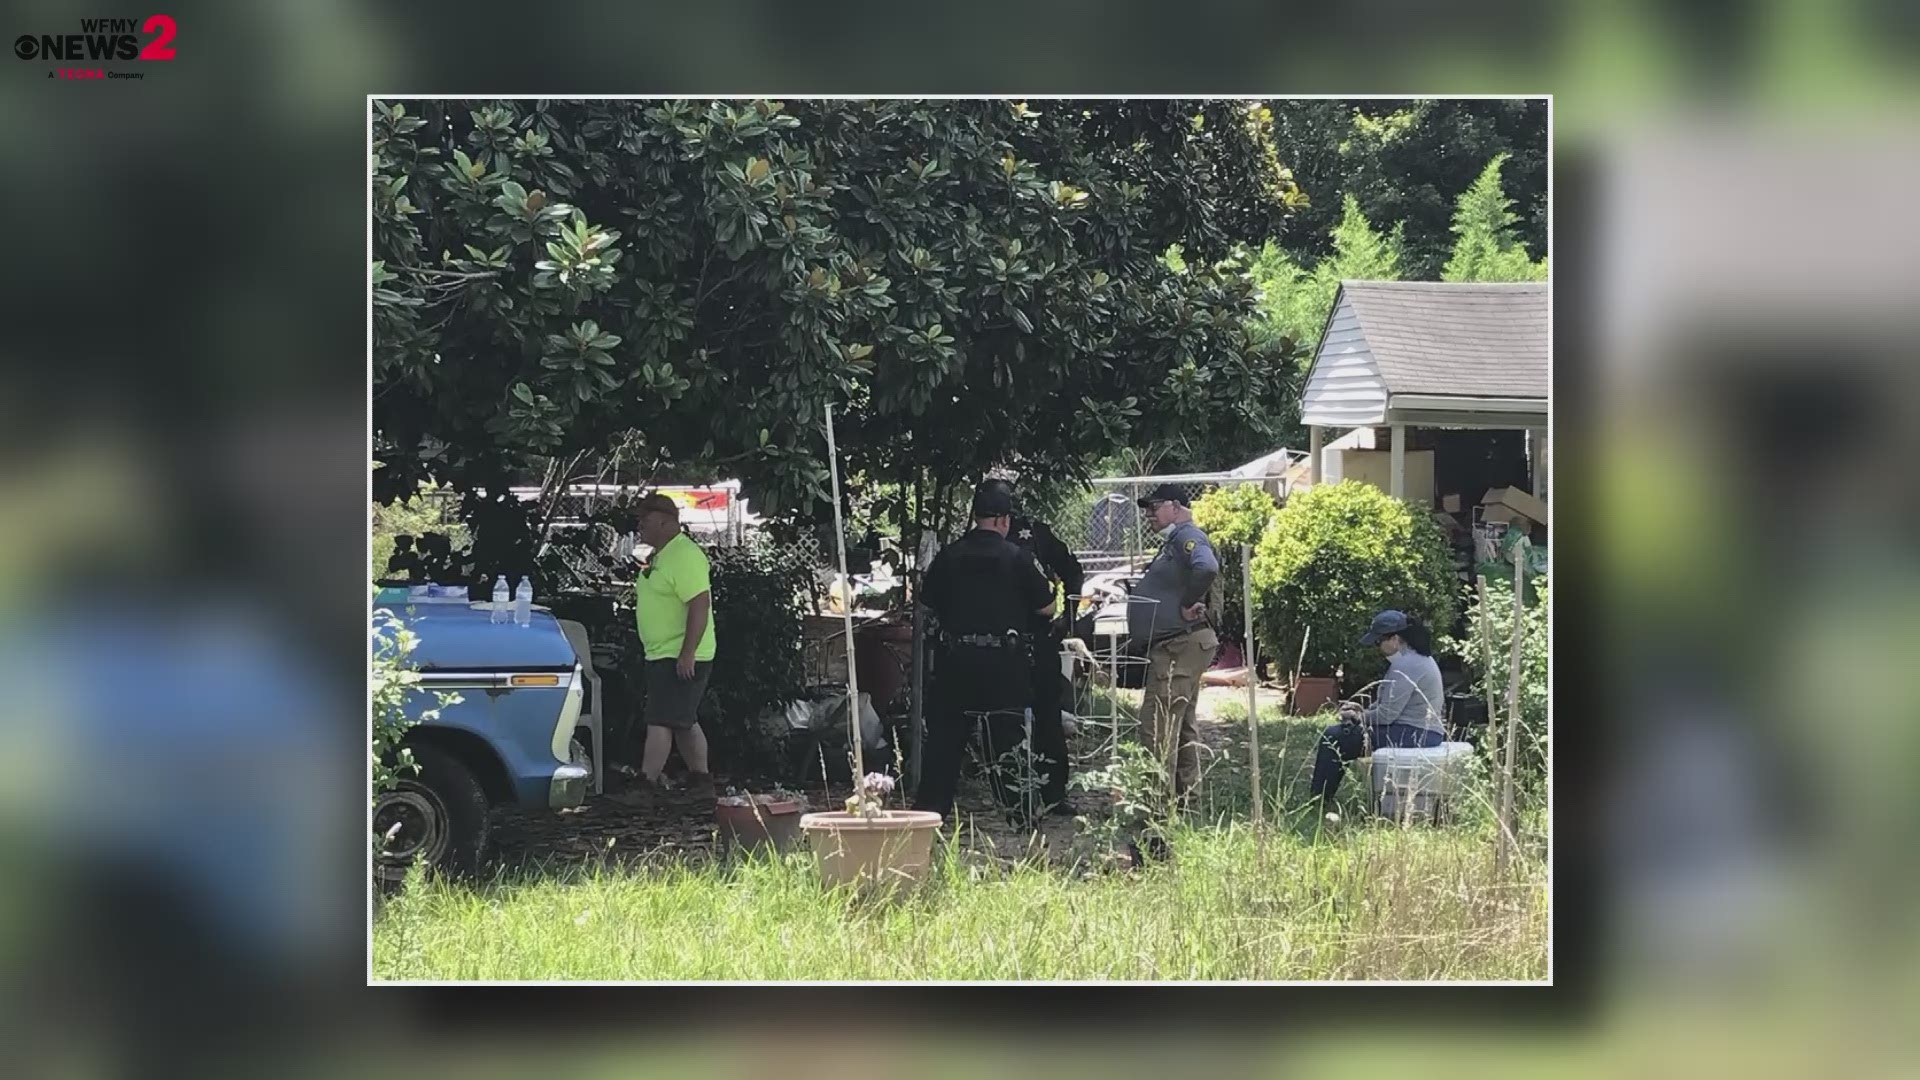 The Forsyth County Sheriff's Office executed a search warrant at the house for animal control violations.